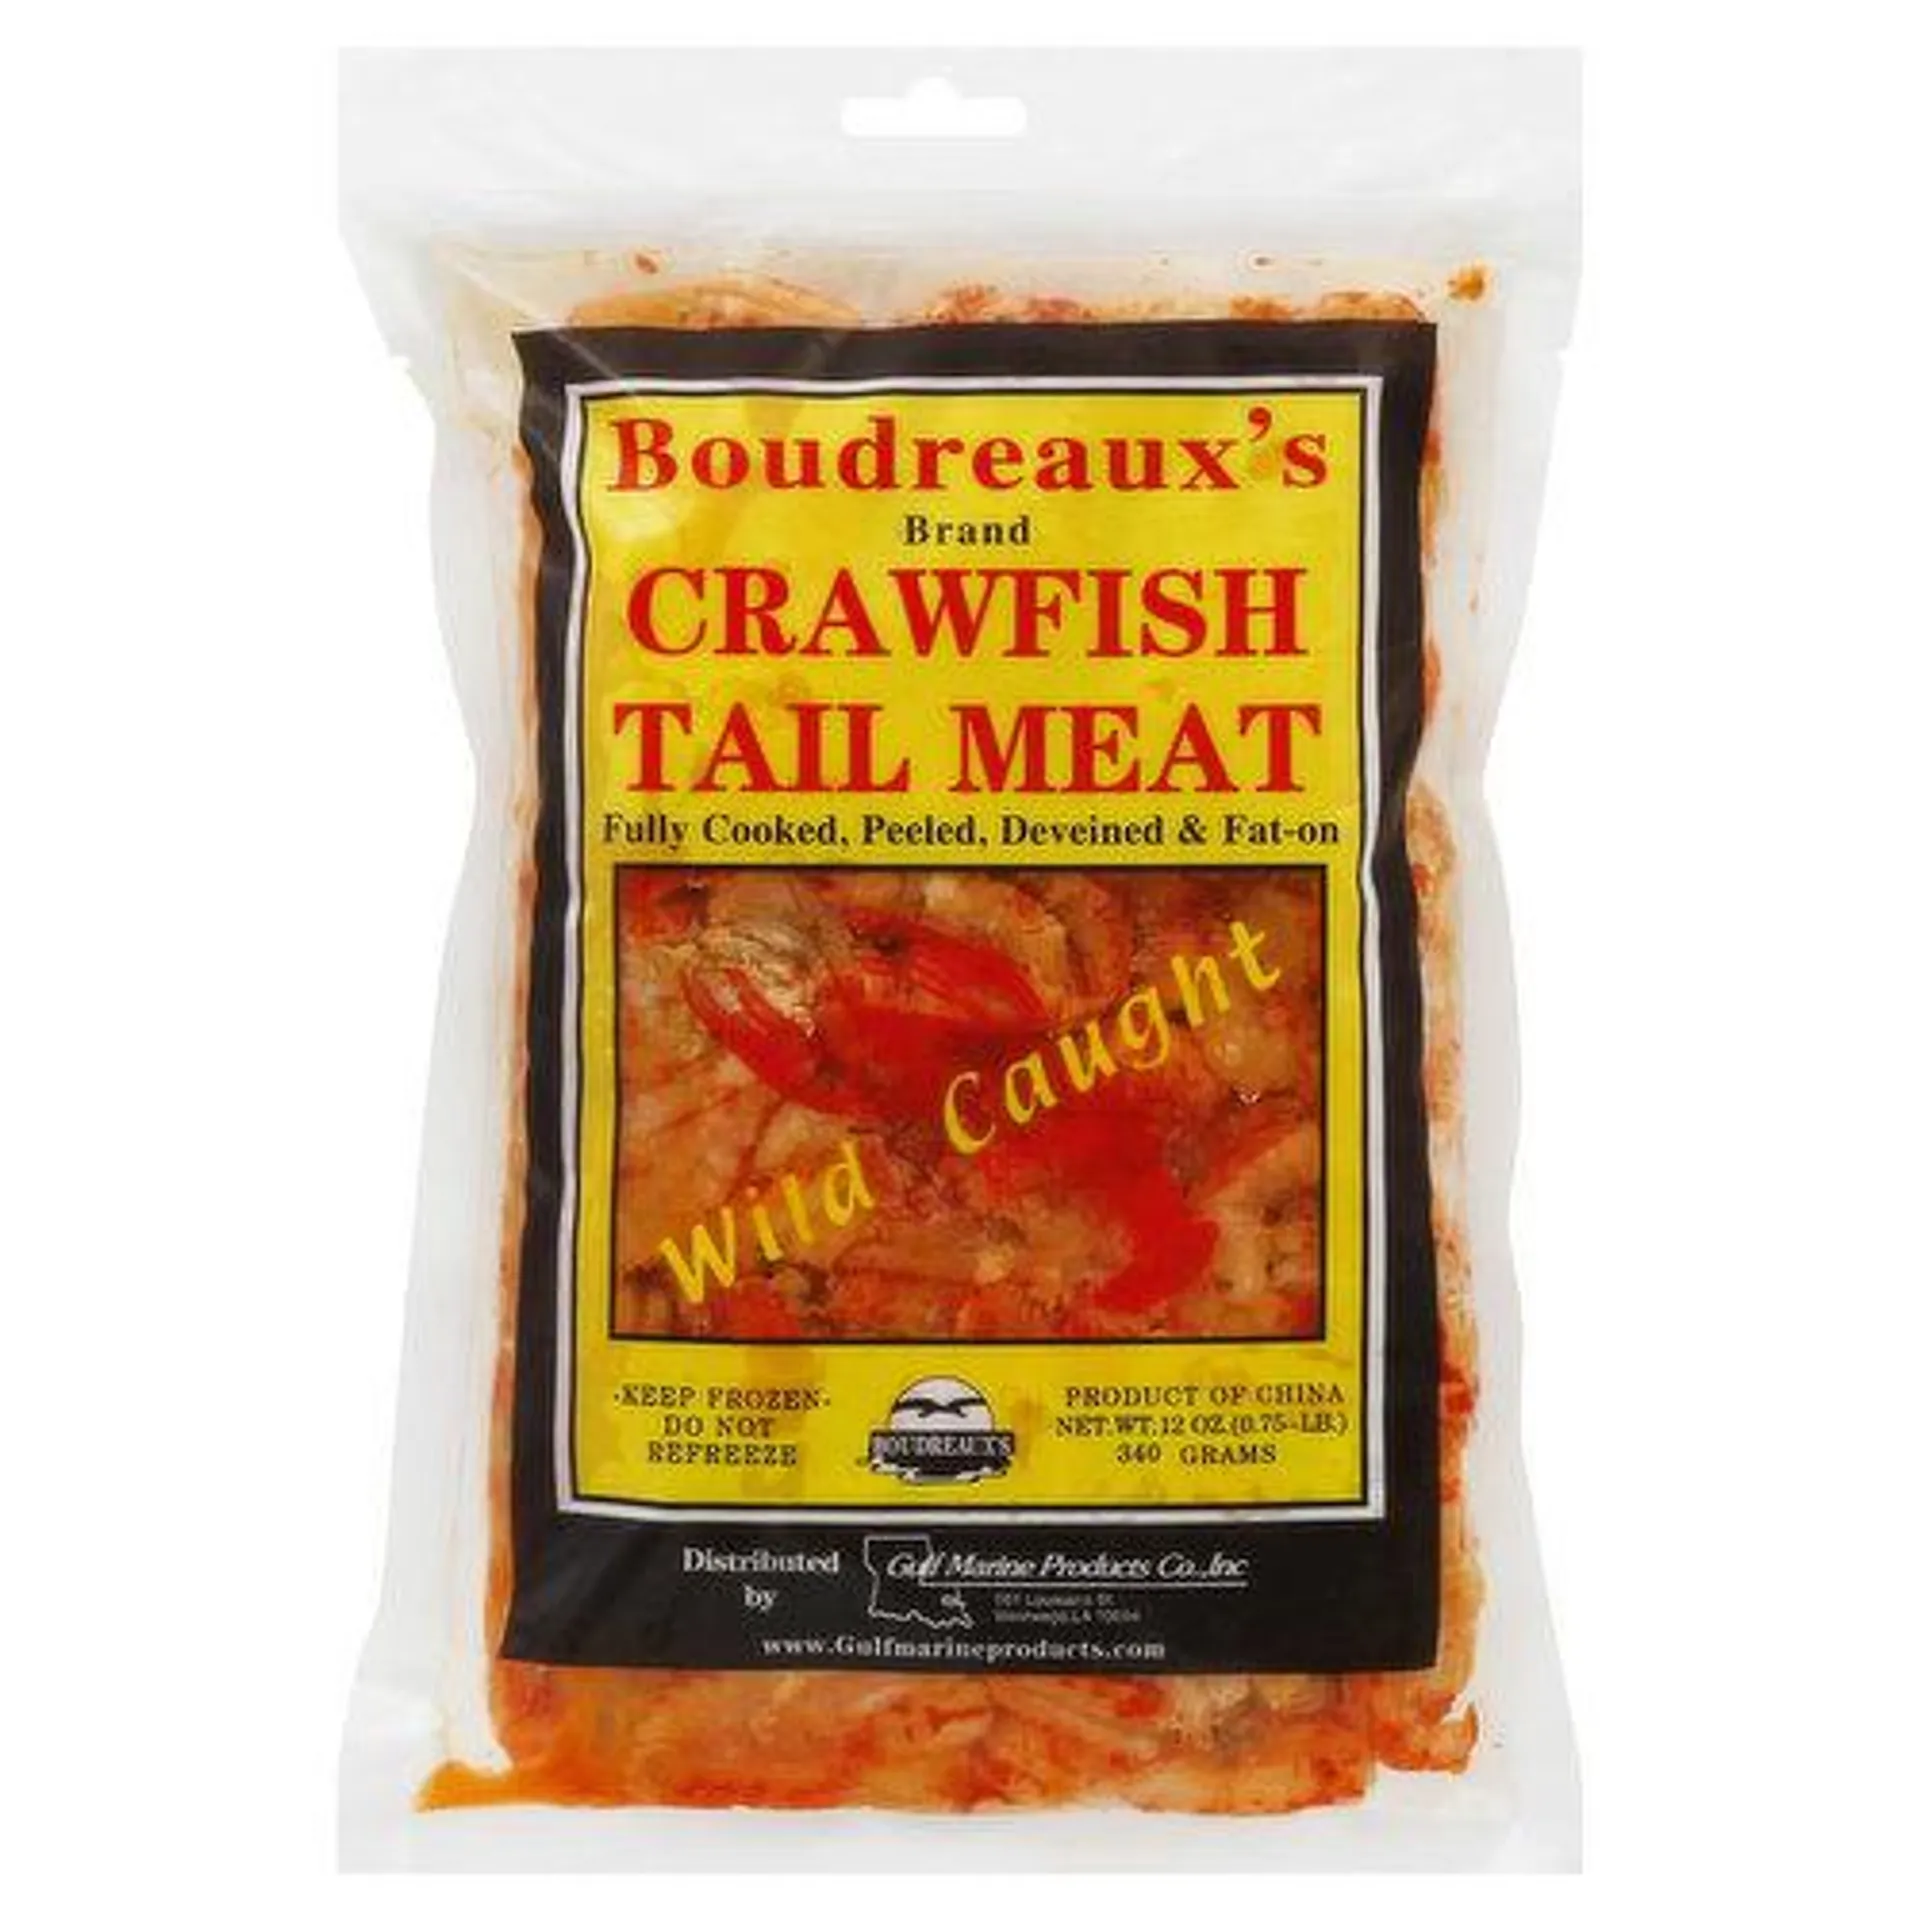 Boudreauxs Crawfish Tail Meat - 12 Ounce